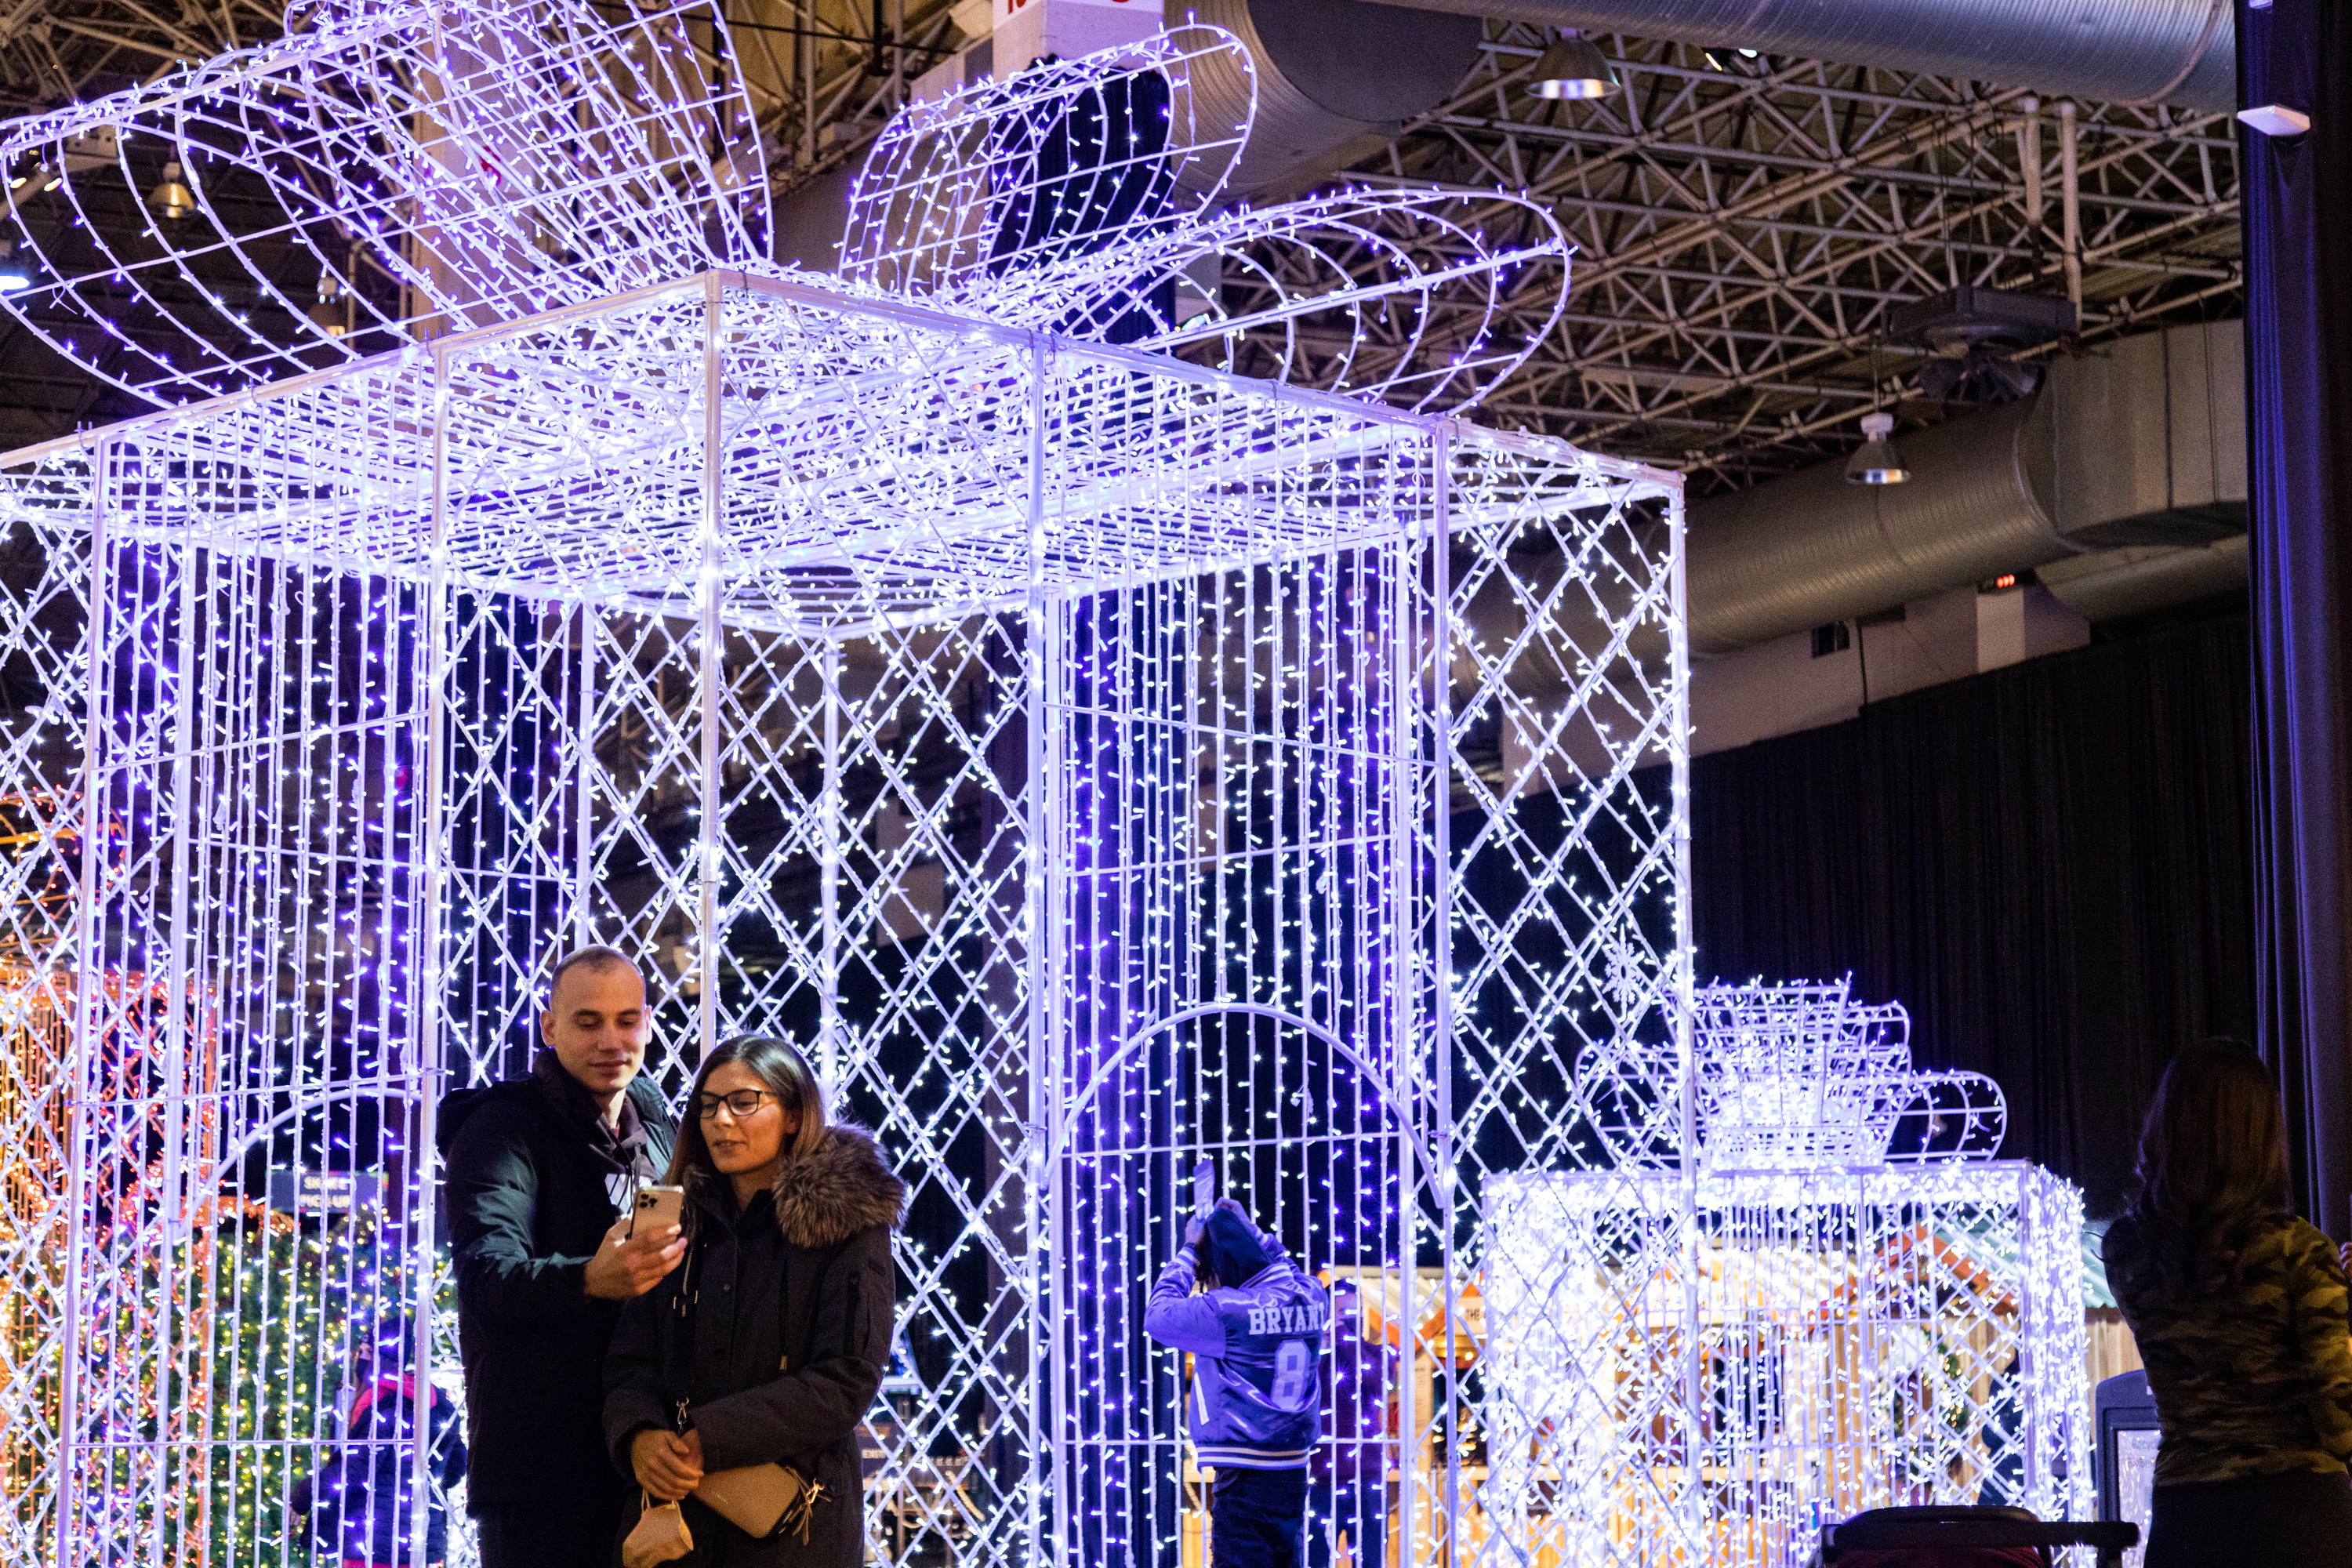 Take a look at the Light Up the Lake indoor display at Navy Pier